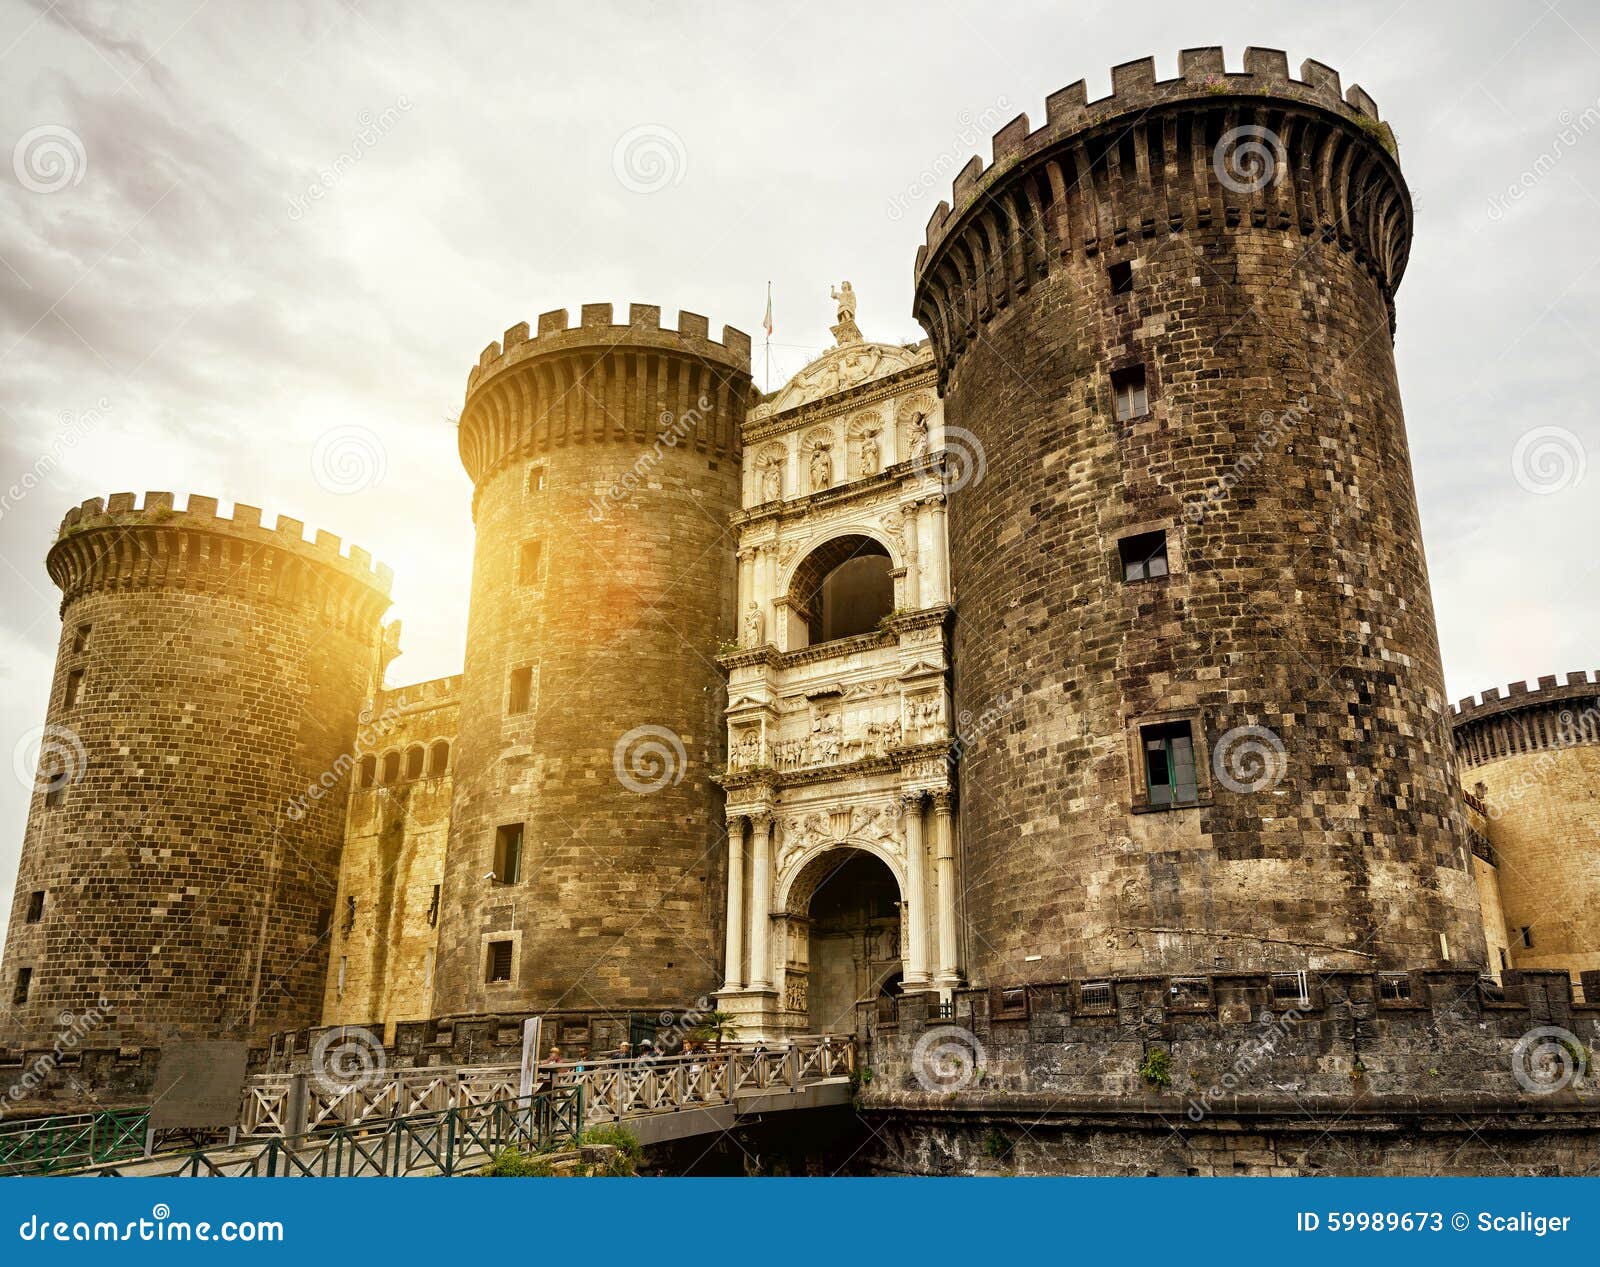 the castel nuovo in naples, italy